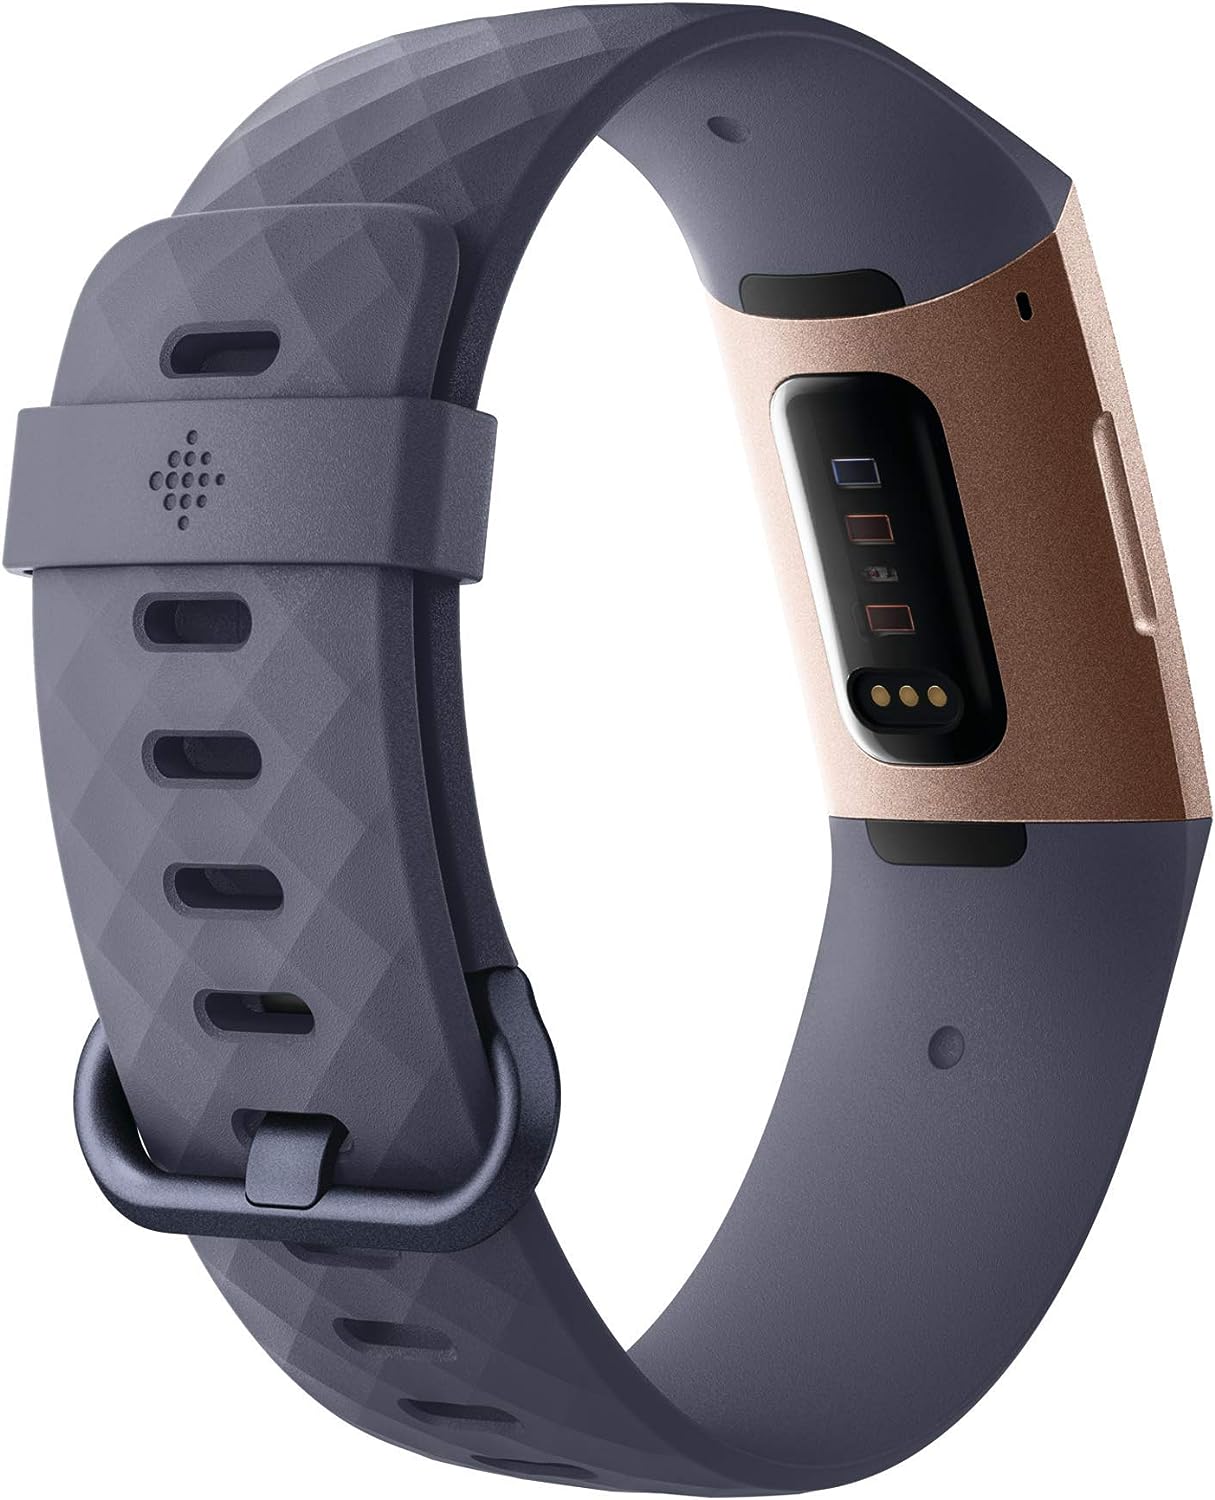 Fitbit Charge 3 Fitness Wristband With Heart Rate Tracker FB409 - Rose Gold/Grey